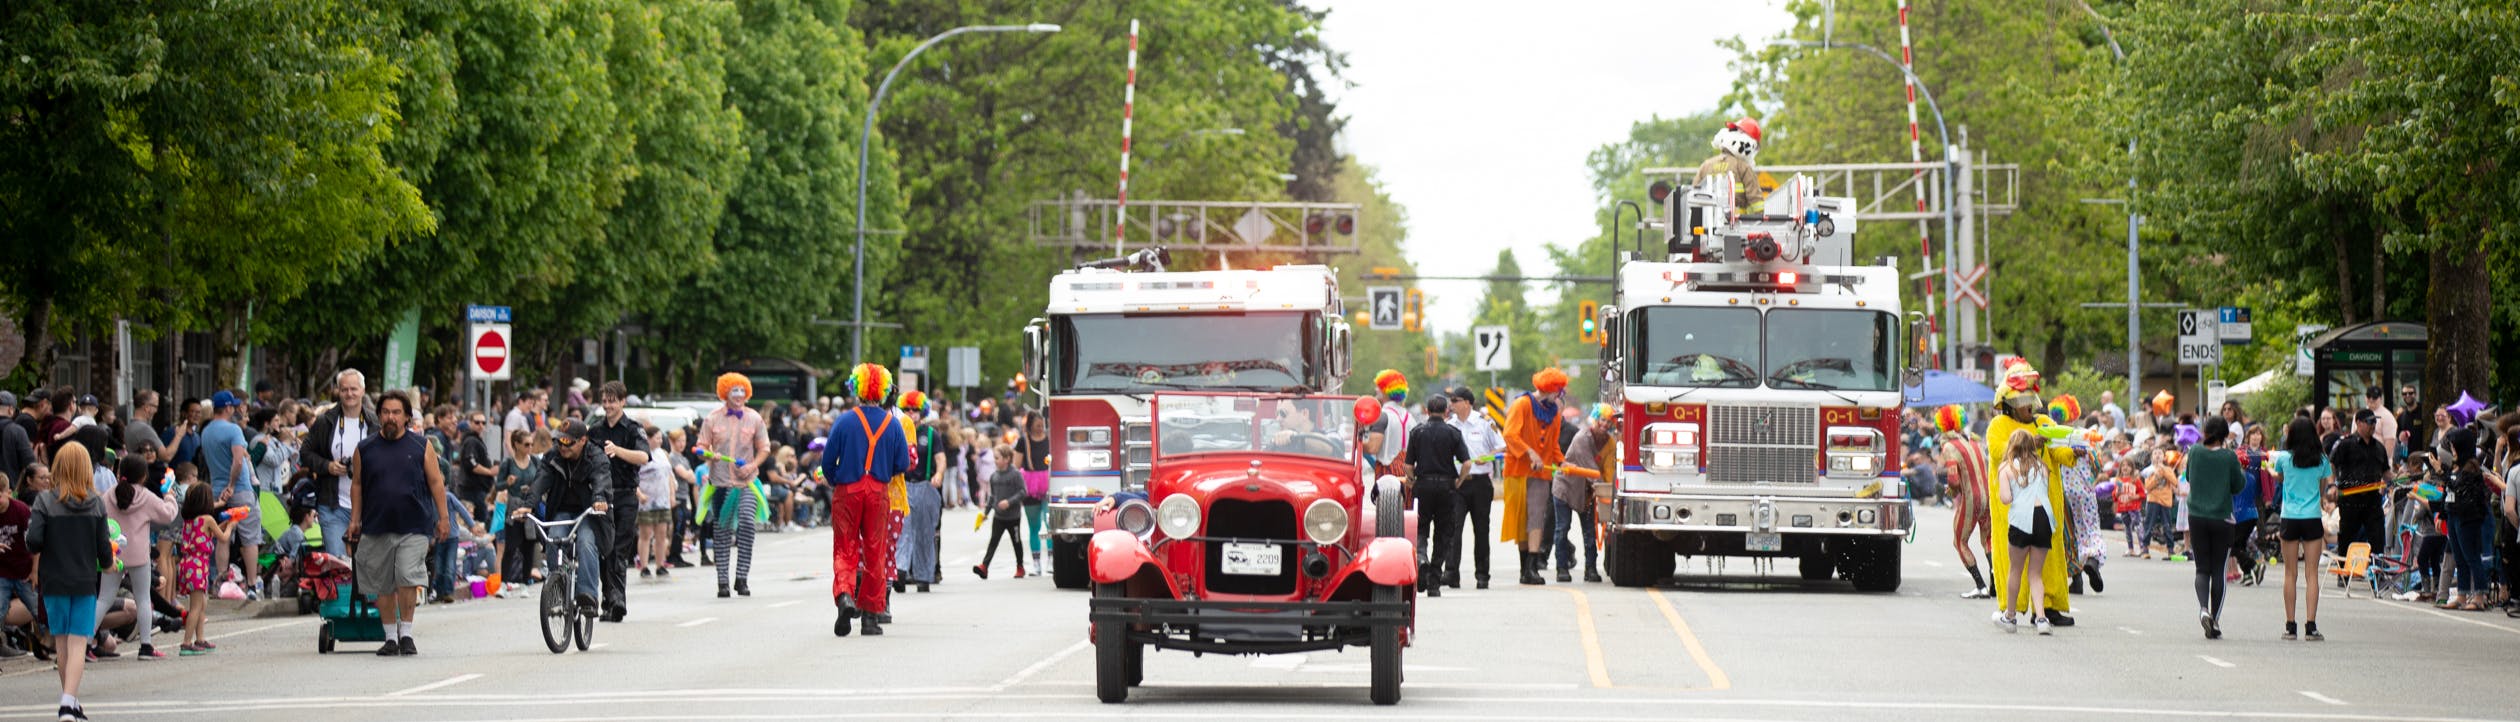 Image of parade crowd at Pitt Meadows Day